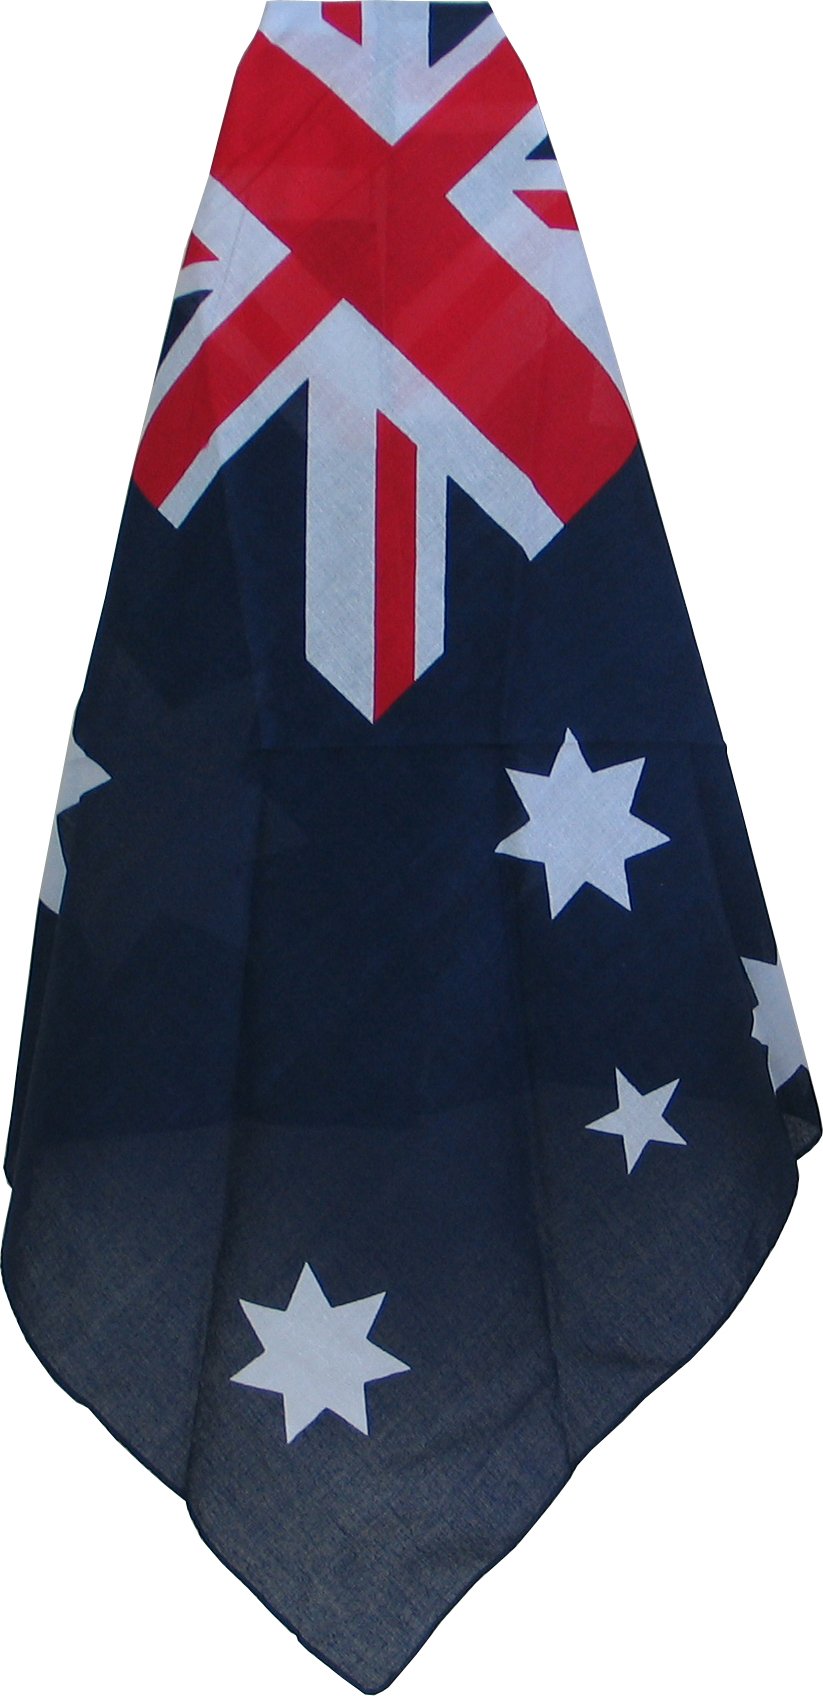 OUTBOUND Bandanna Australian Flag - OUTBOUND NEW : Keep Safe in the ...